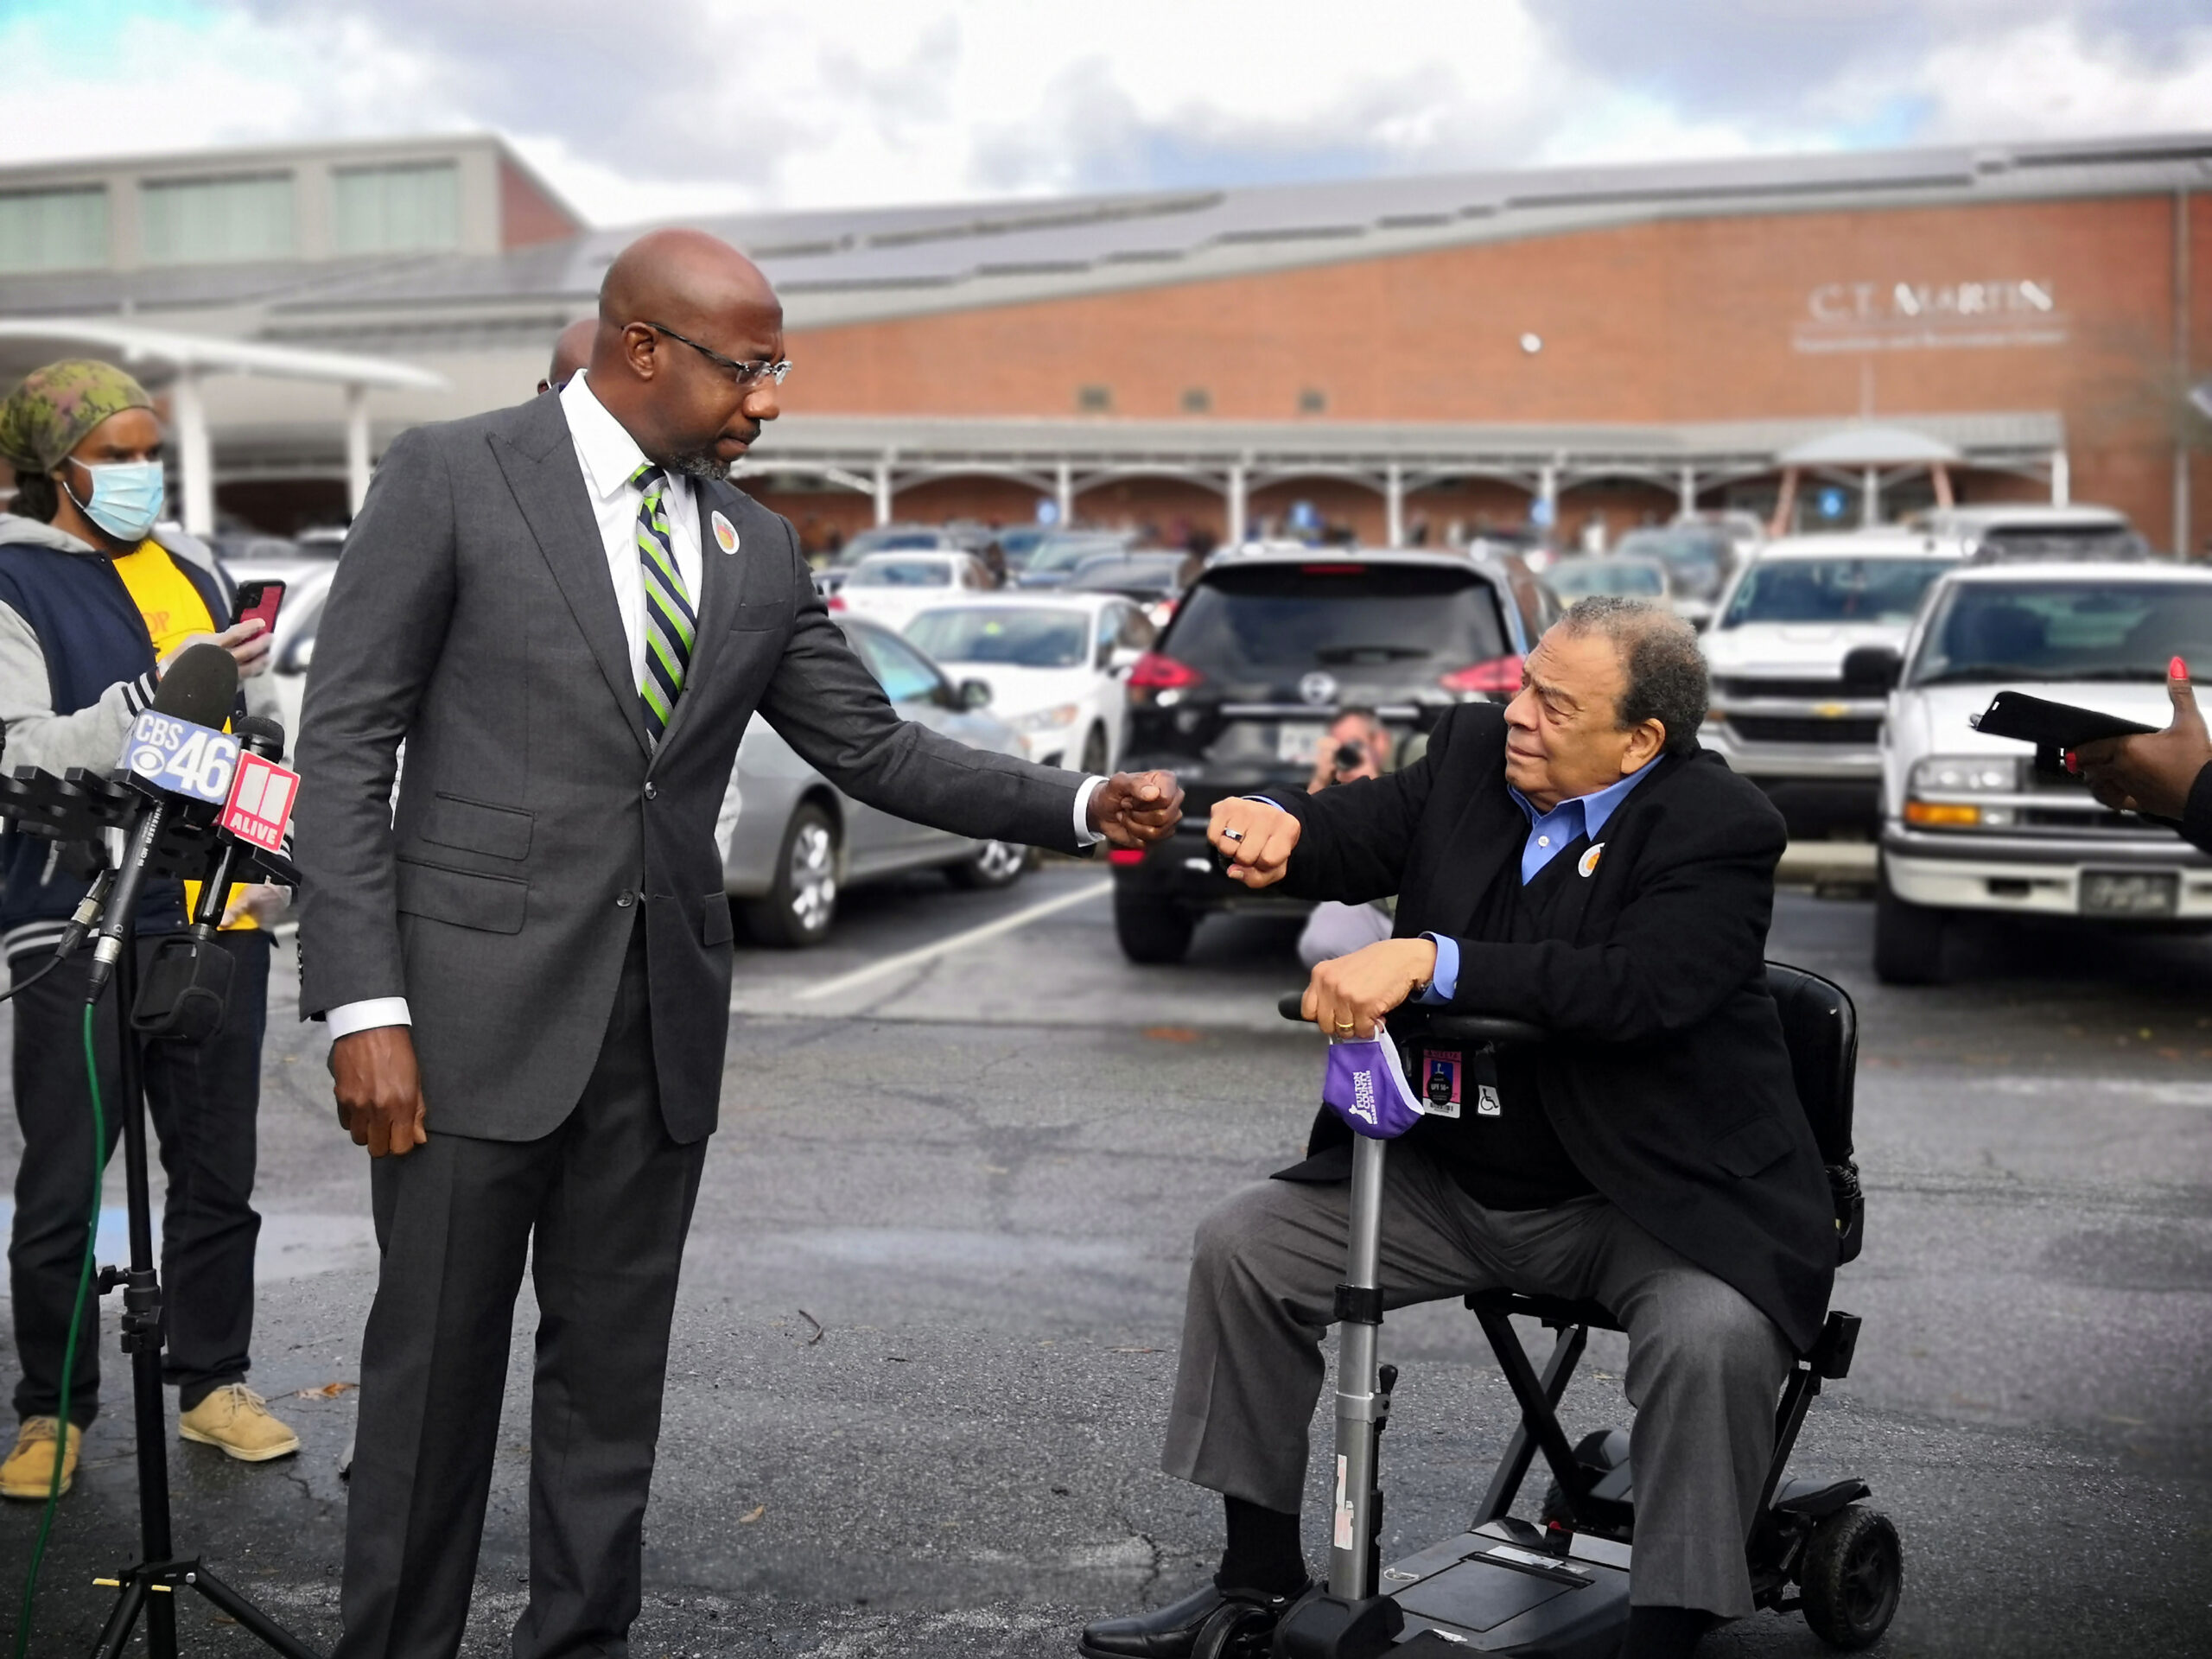 Rev. Dr. Raphael Warnock and former Atlanta Mayor and U.S. Ambassador to the United Nations, Andrew Young share a fist bump at C.T. Martin Natatorium and Recreation Center